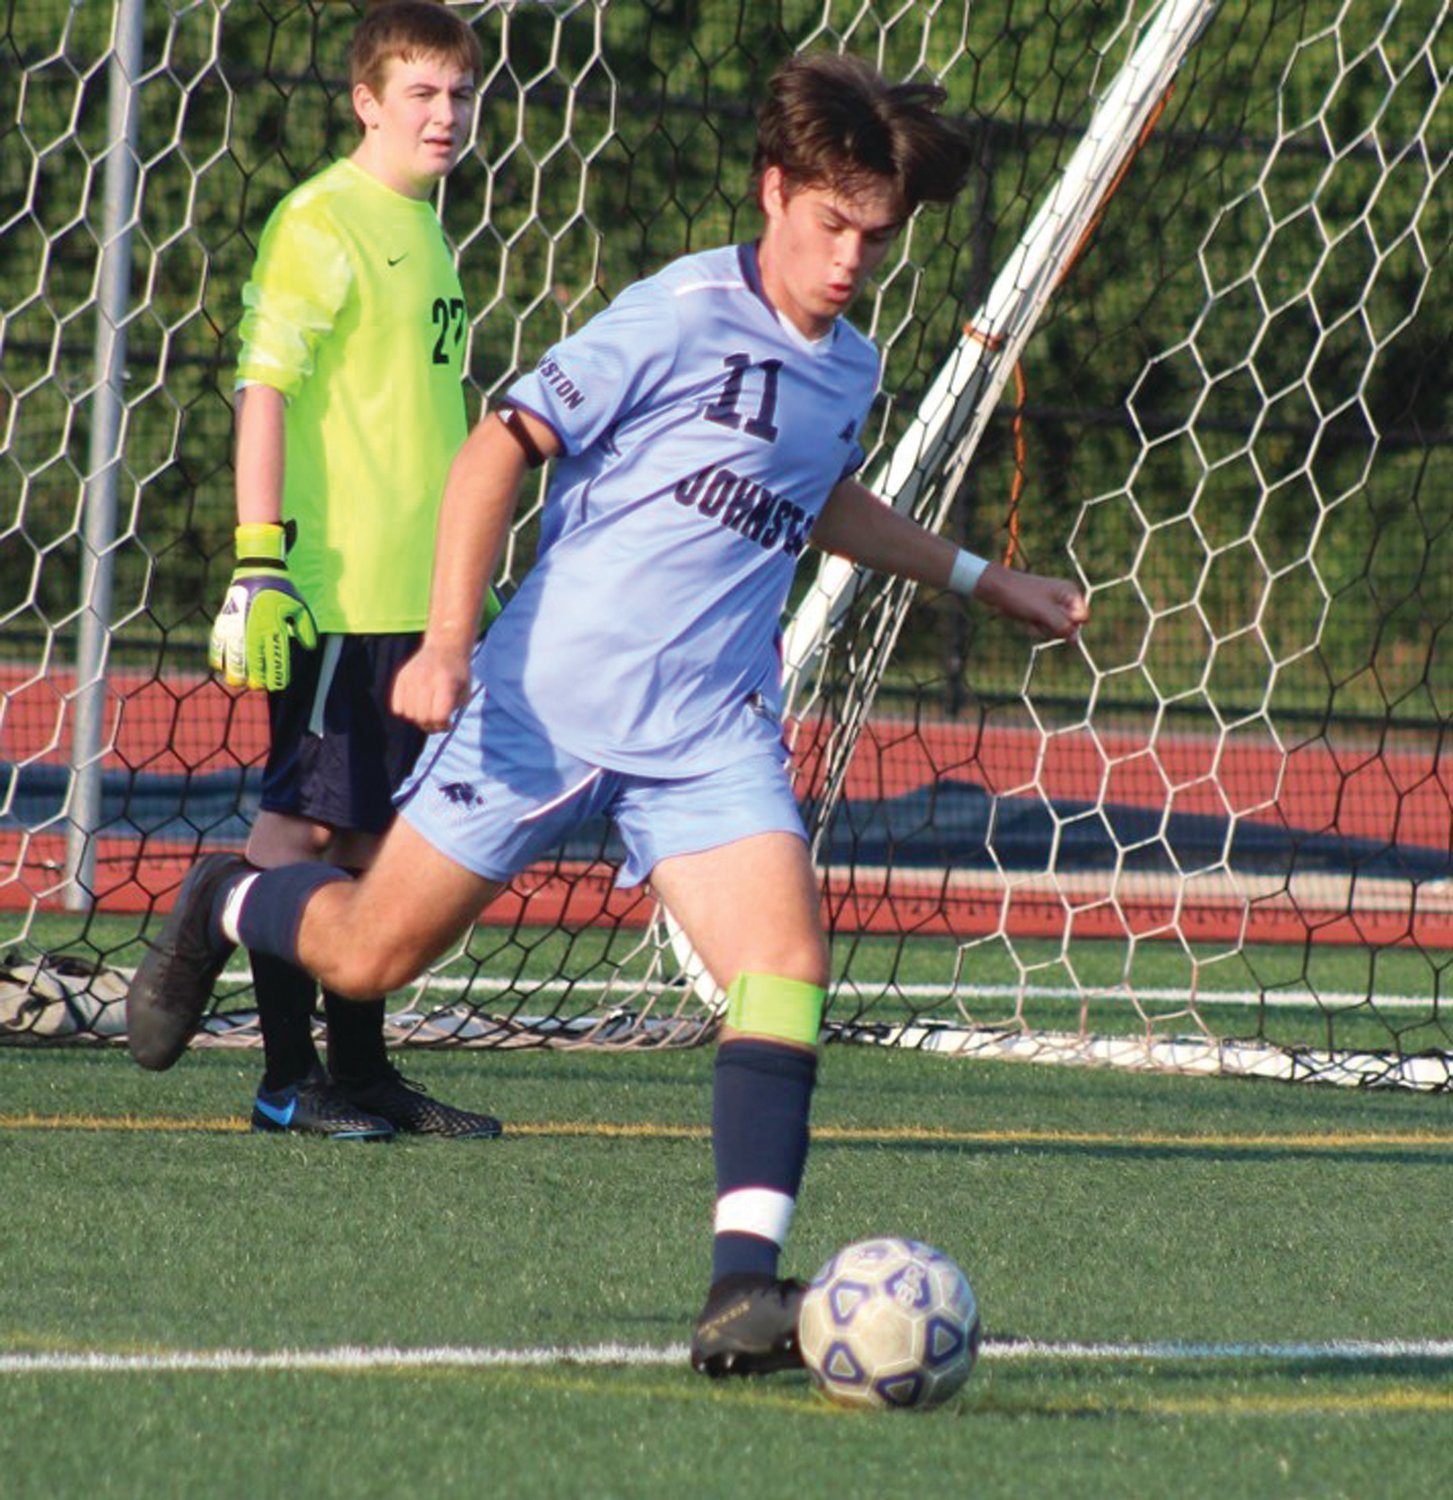 Jacob Muller boots the ball out of the zone.